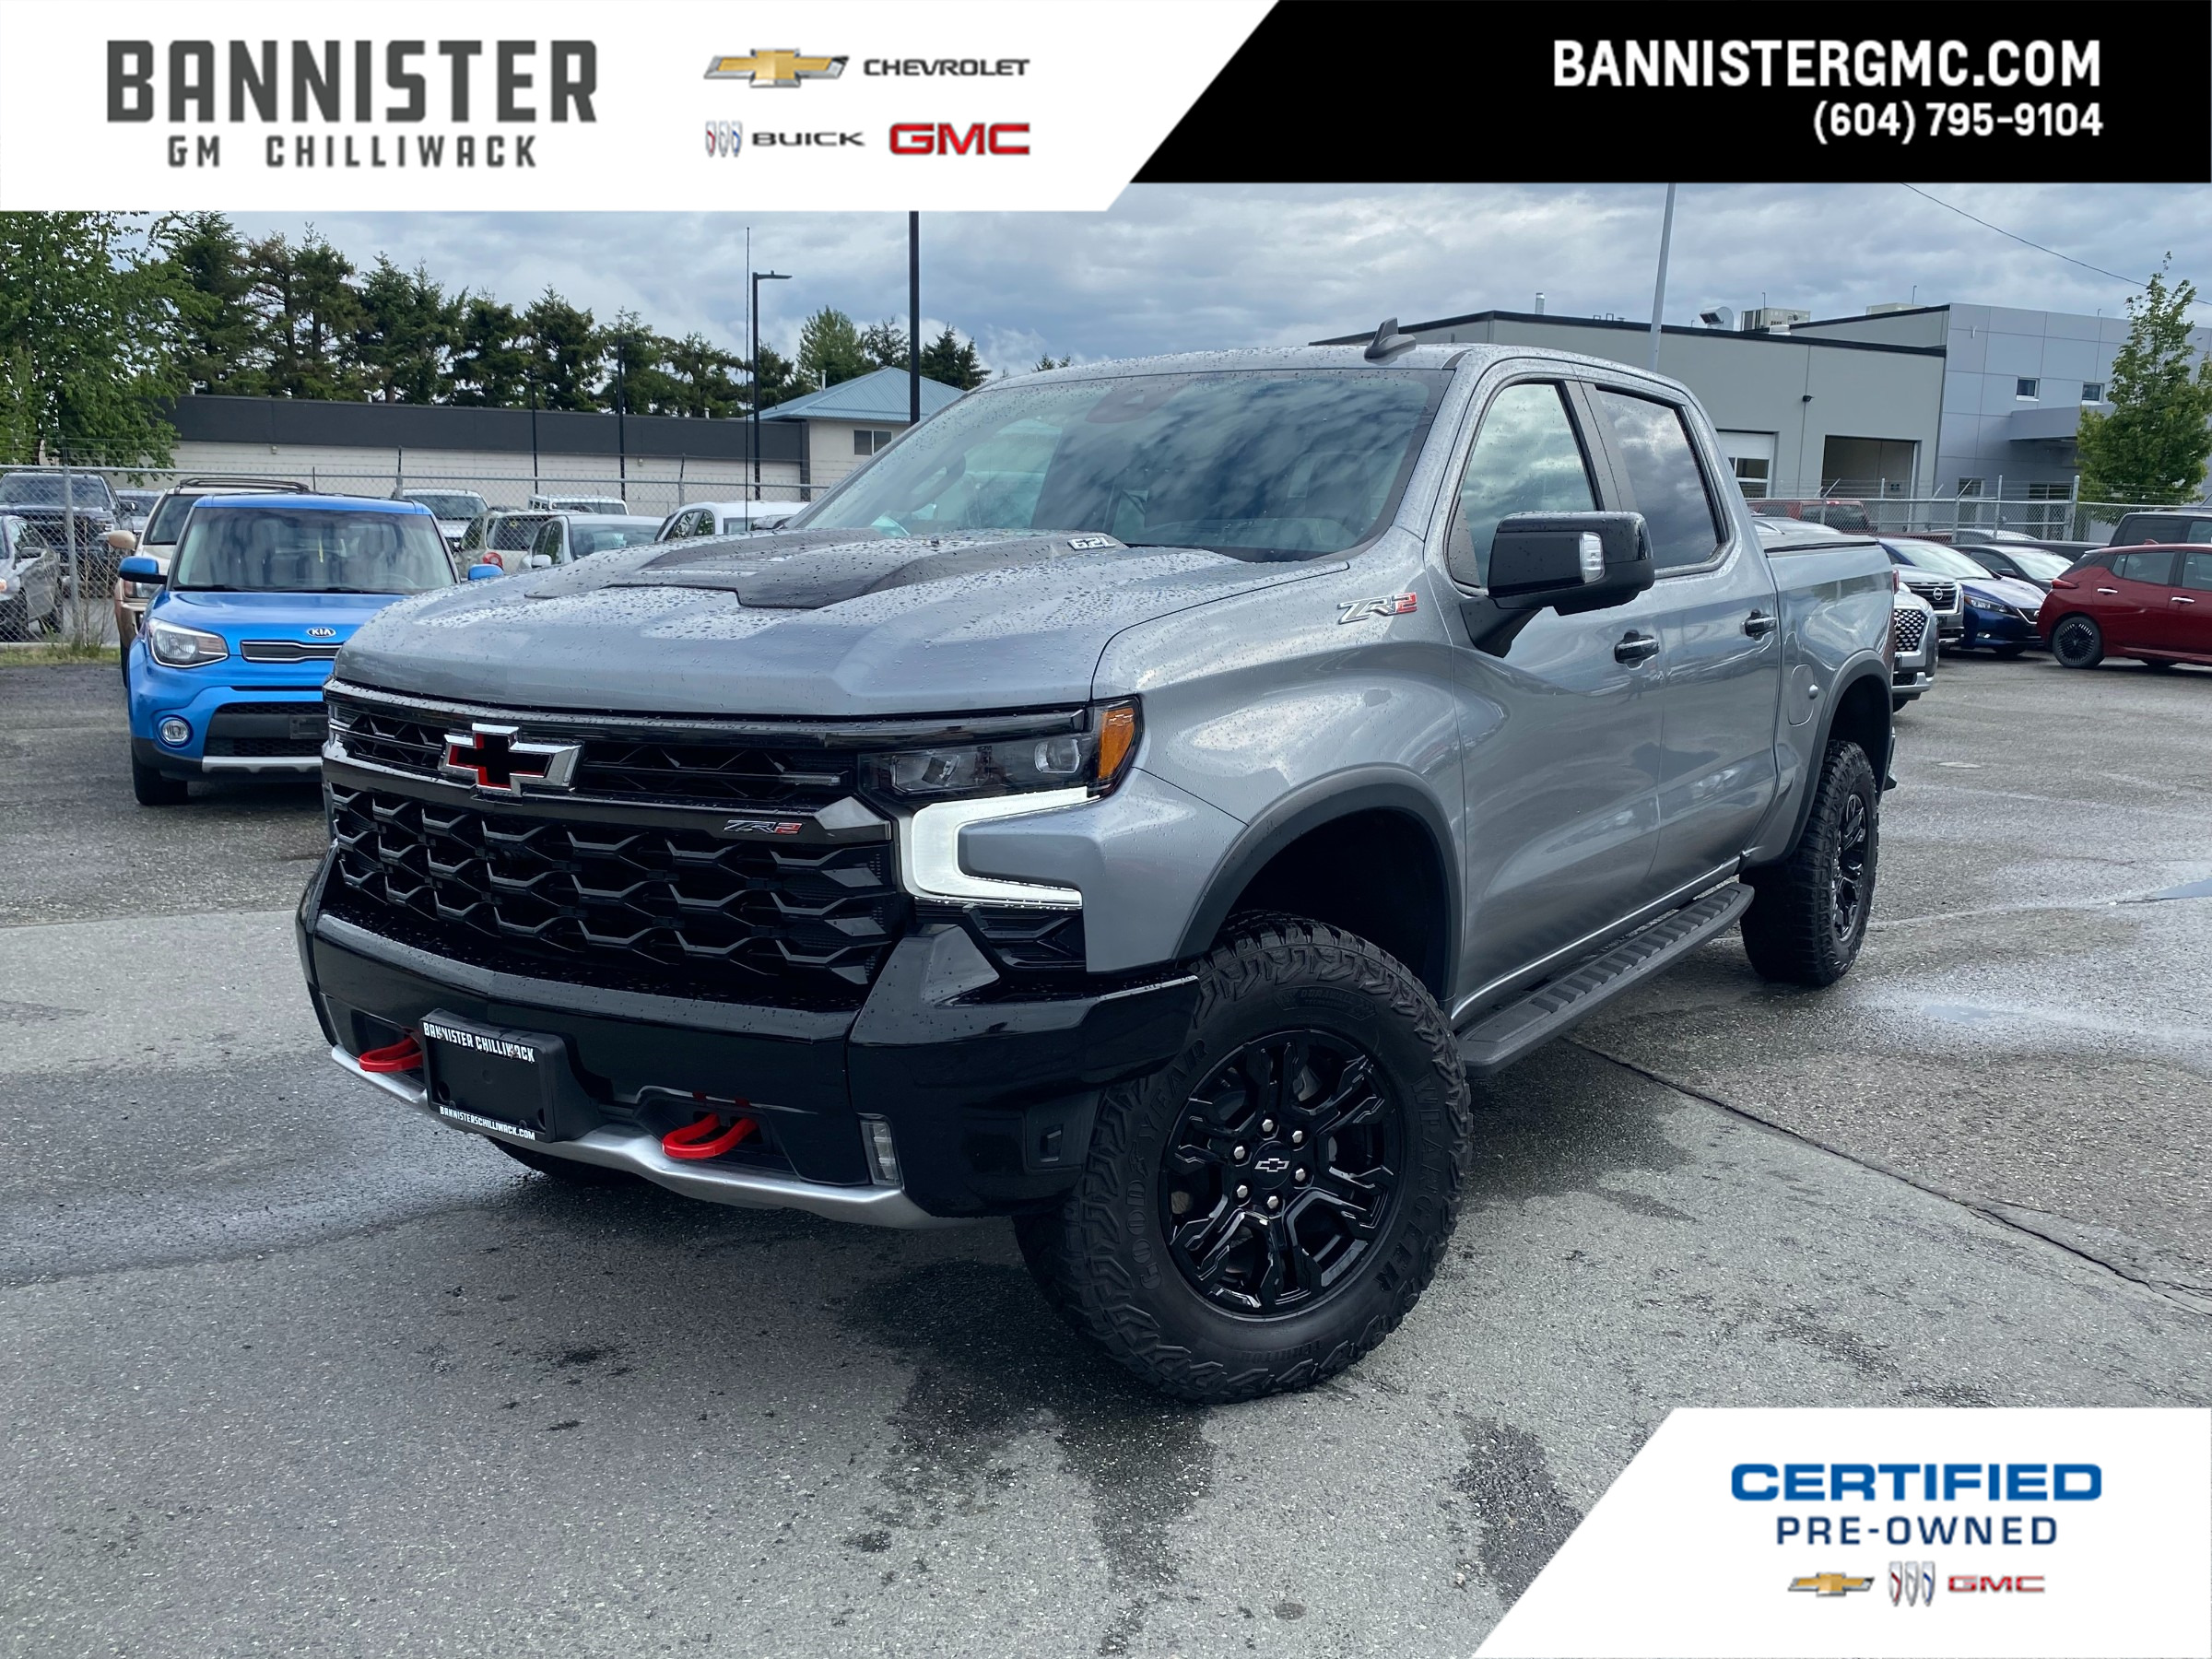 2023 Chevrolet Silverado 1500 ZR2 CERTIFIED PRE-OWNED RATES AS LOW AS 4.99% O.A.